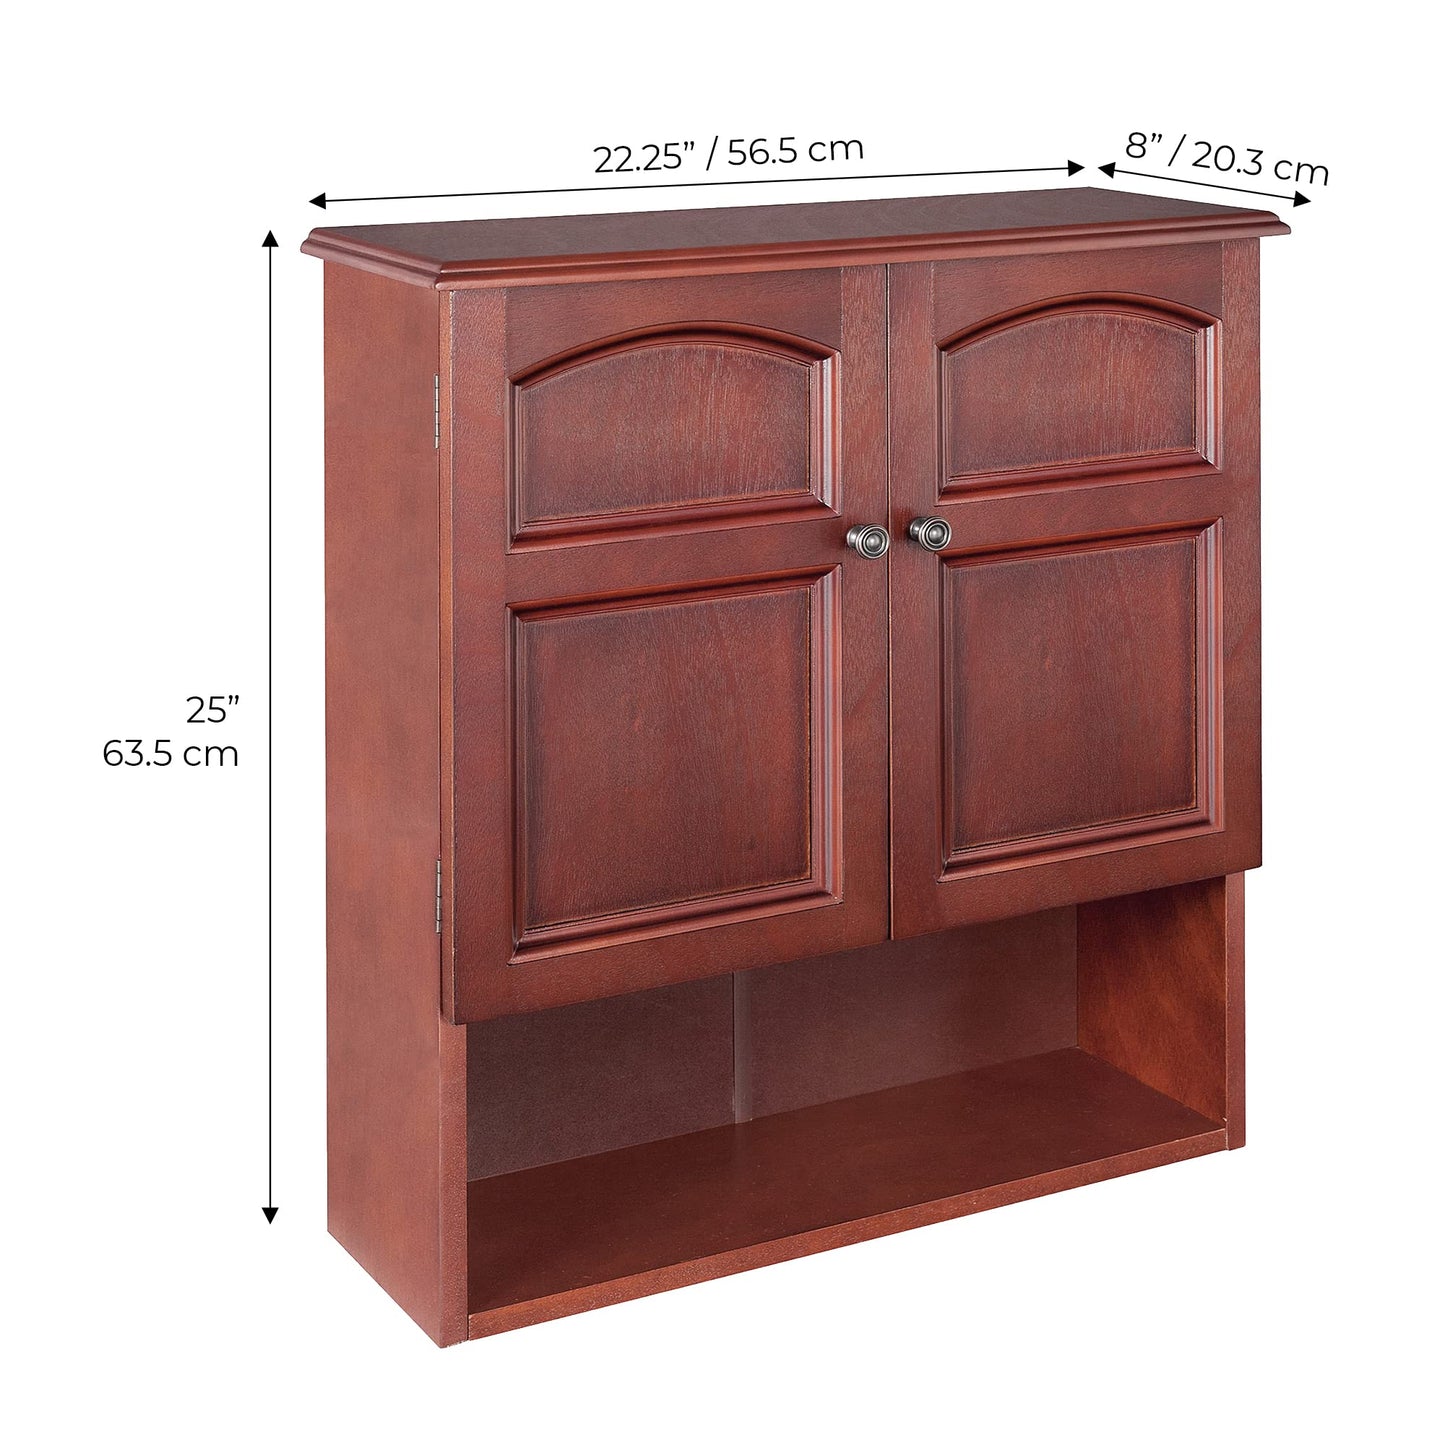 Teamson Home Martha 22.25 in. x 25 in. 2-Door Removable Wall Cabinet with Interior Adjustable Shelf for Storage Solutions in Bathrooms, Kitchens,